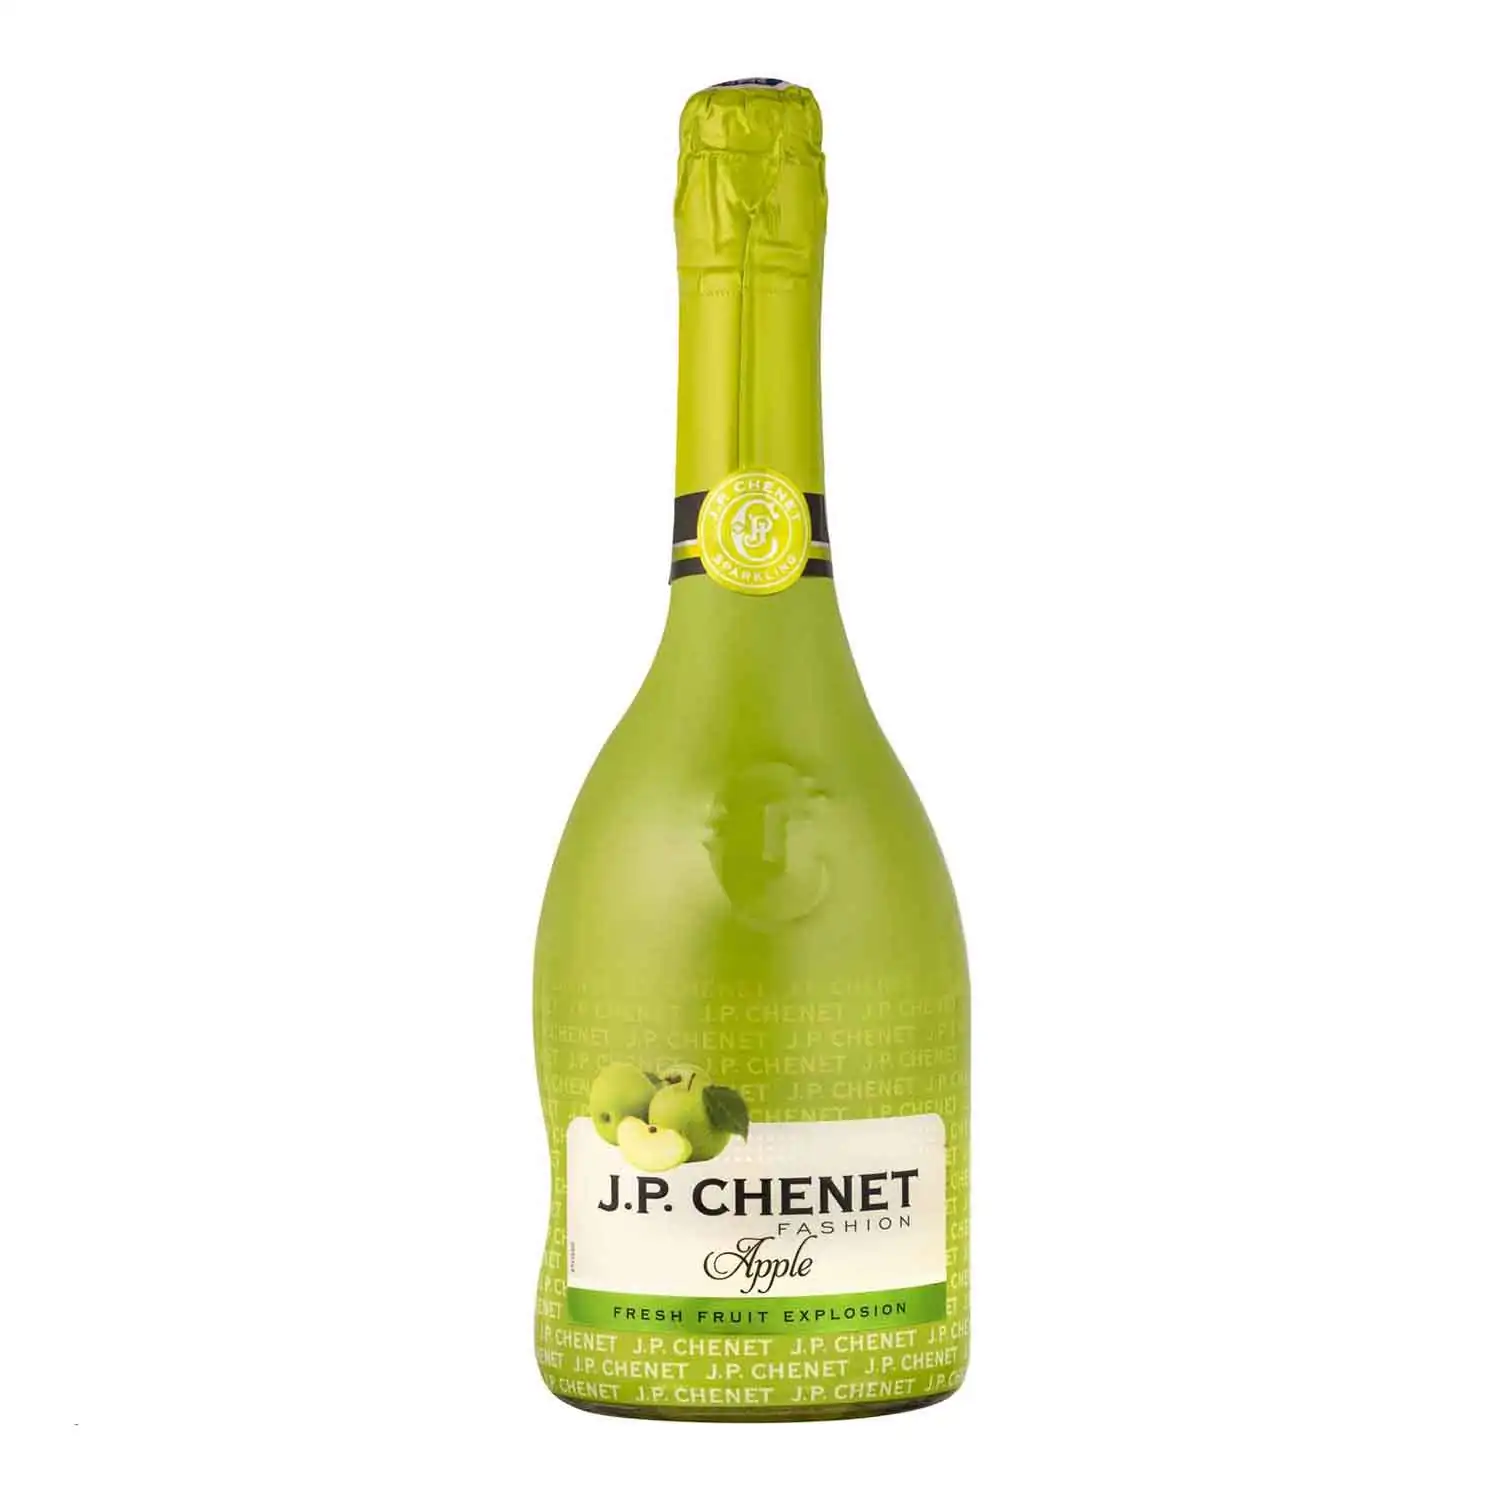 JP Chenet fashion apple 75cl Alc 12% - Buy at Real Tobacco